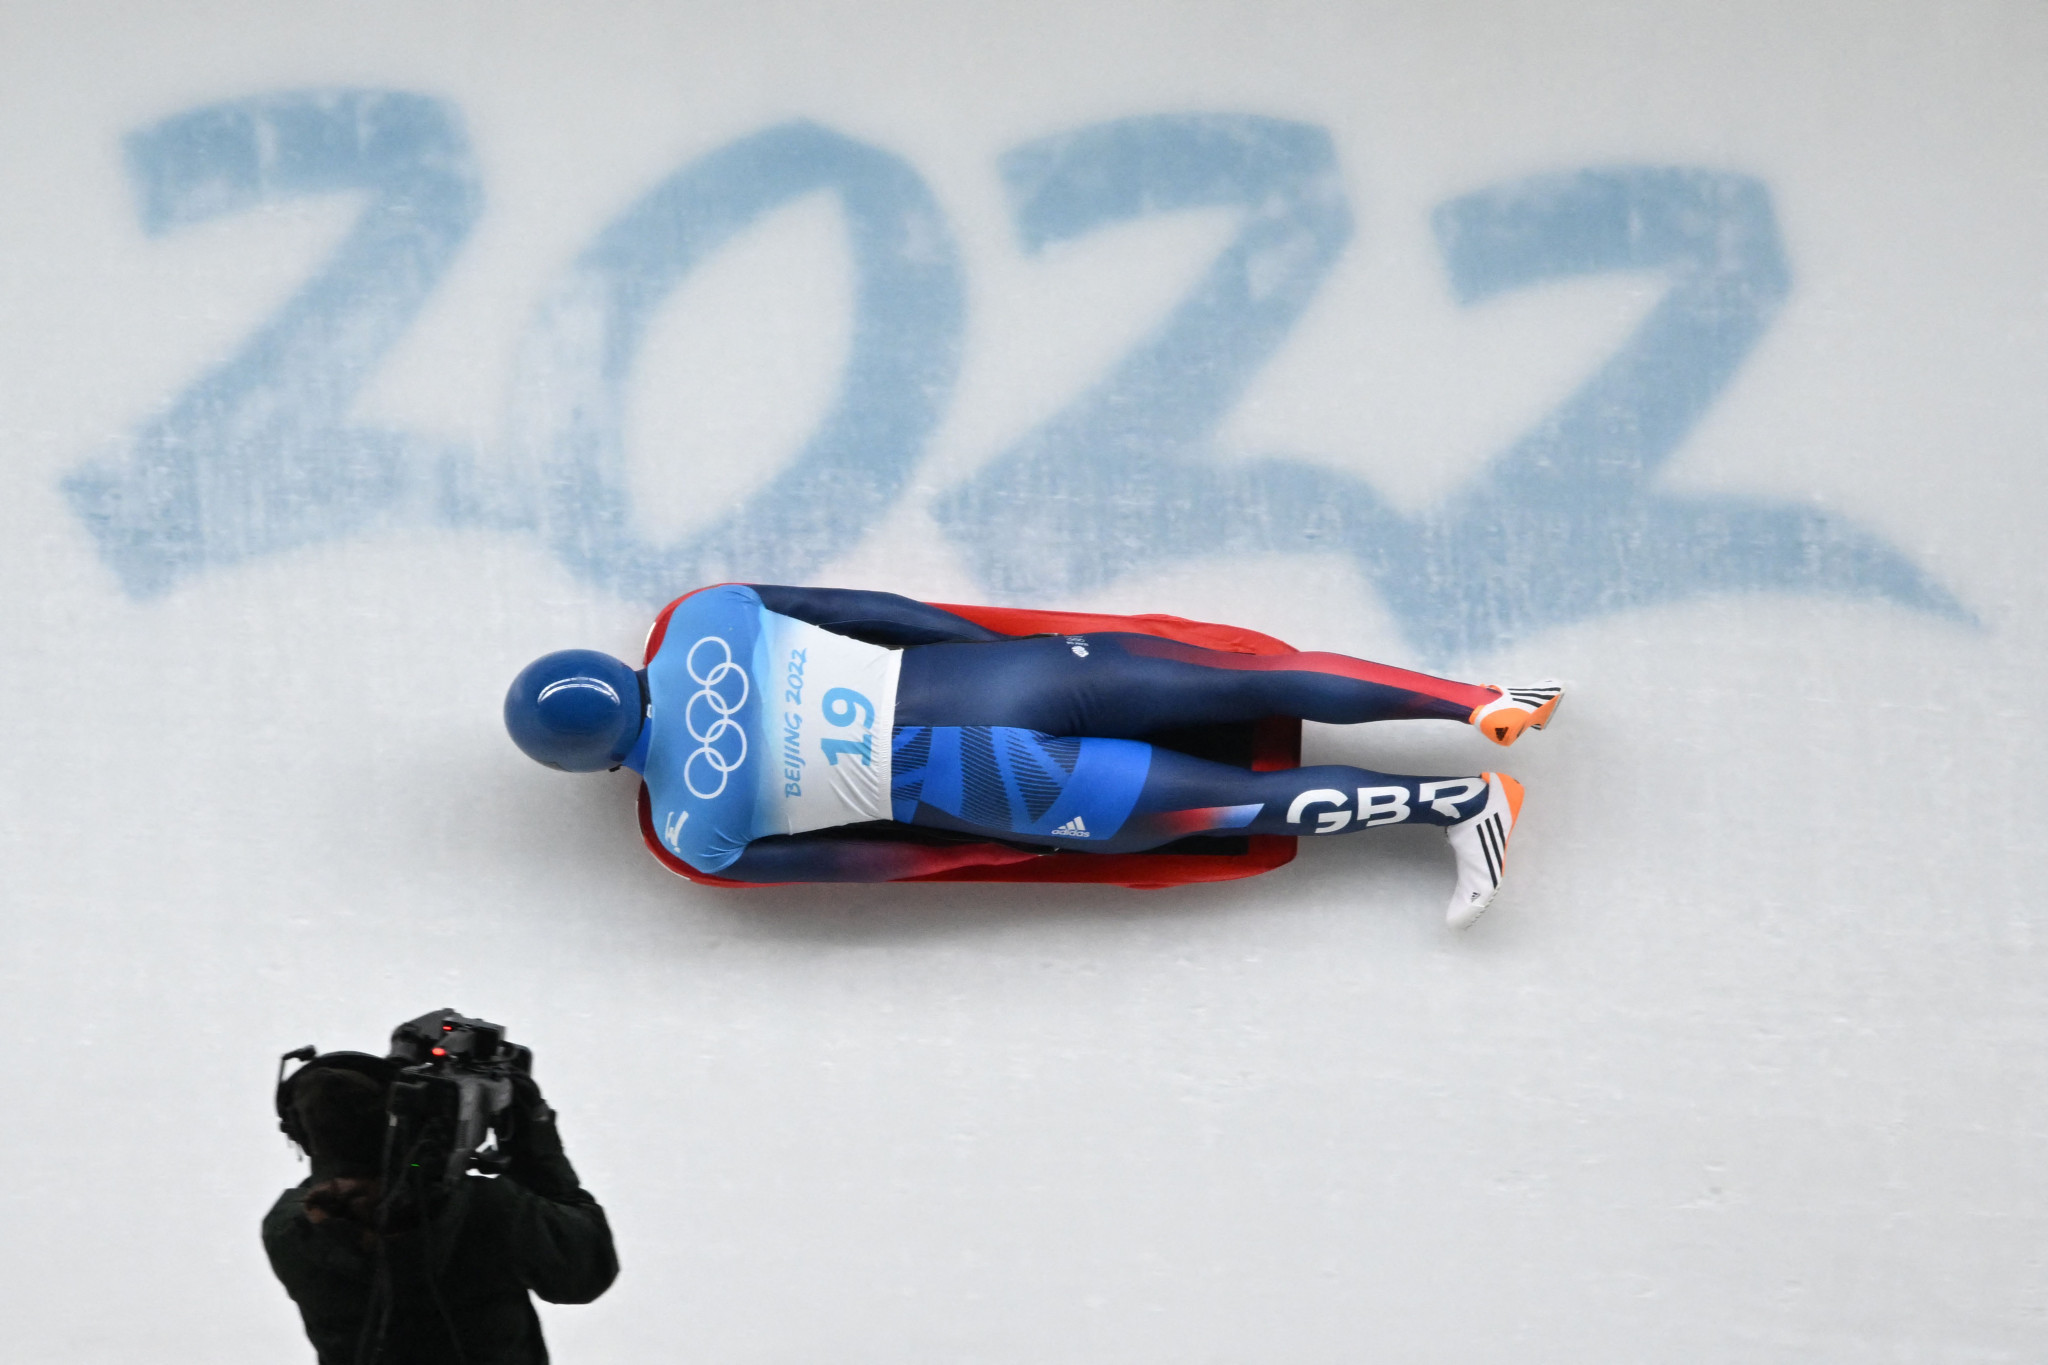 Marcus Wyatt finished 16th in the skeleton competition at the Beijing 2022 Winter Olympics ©Getty Images 